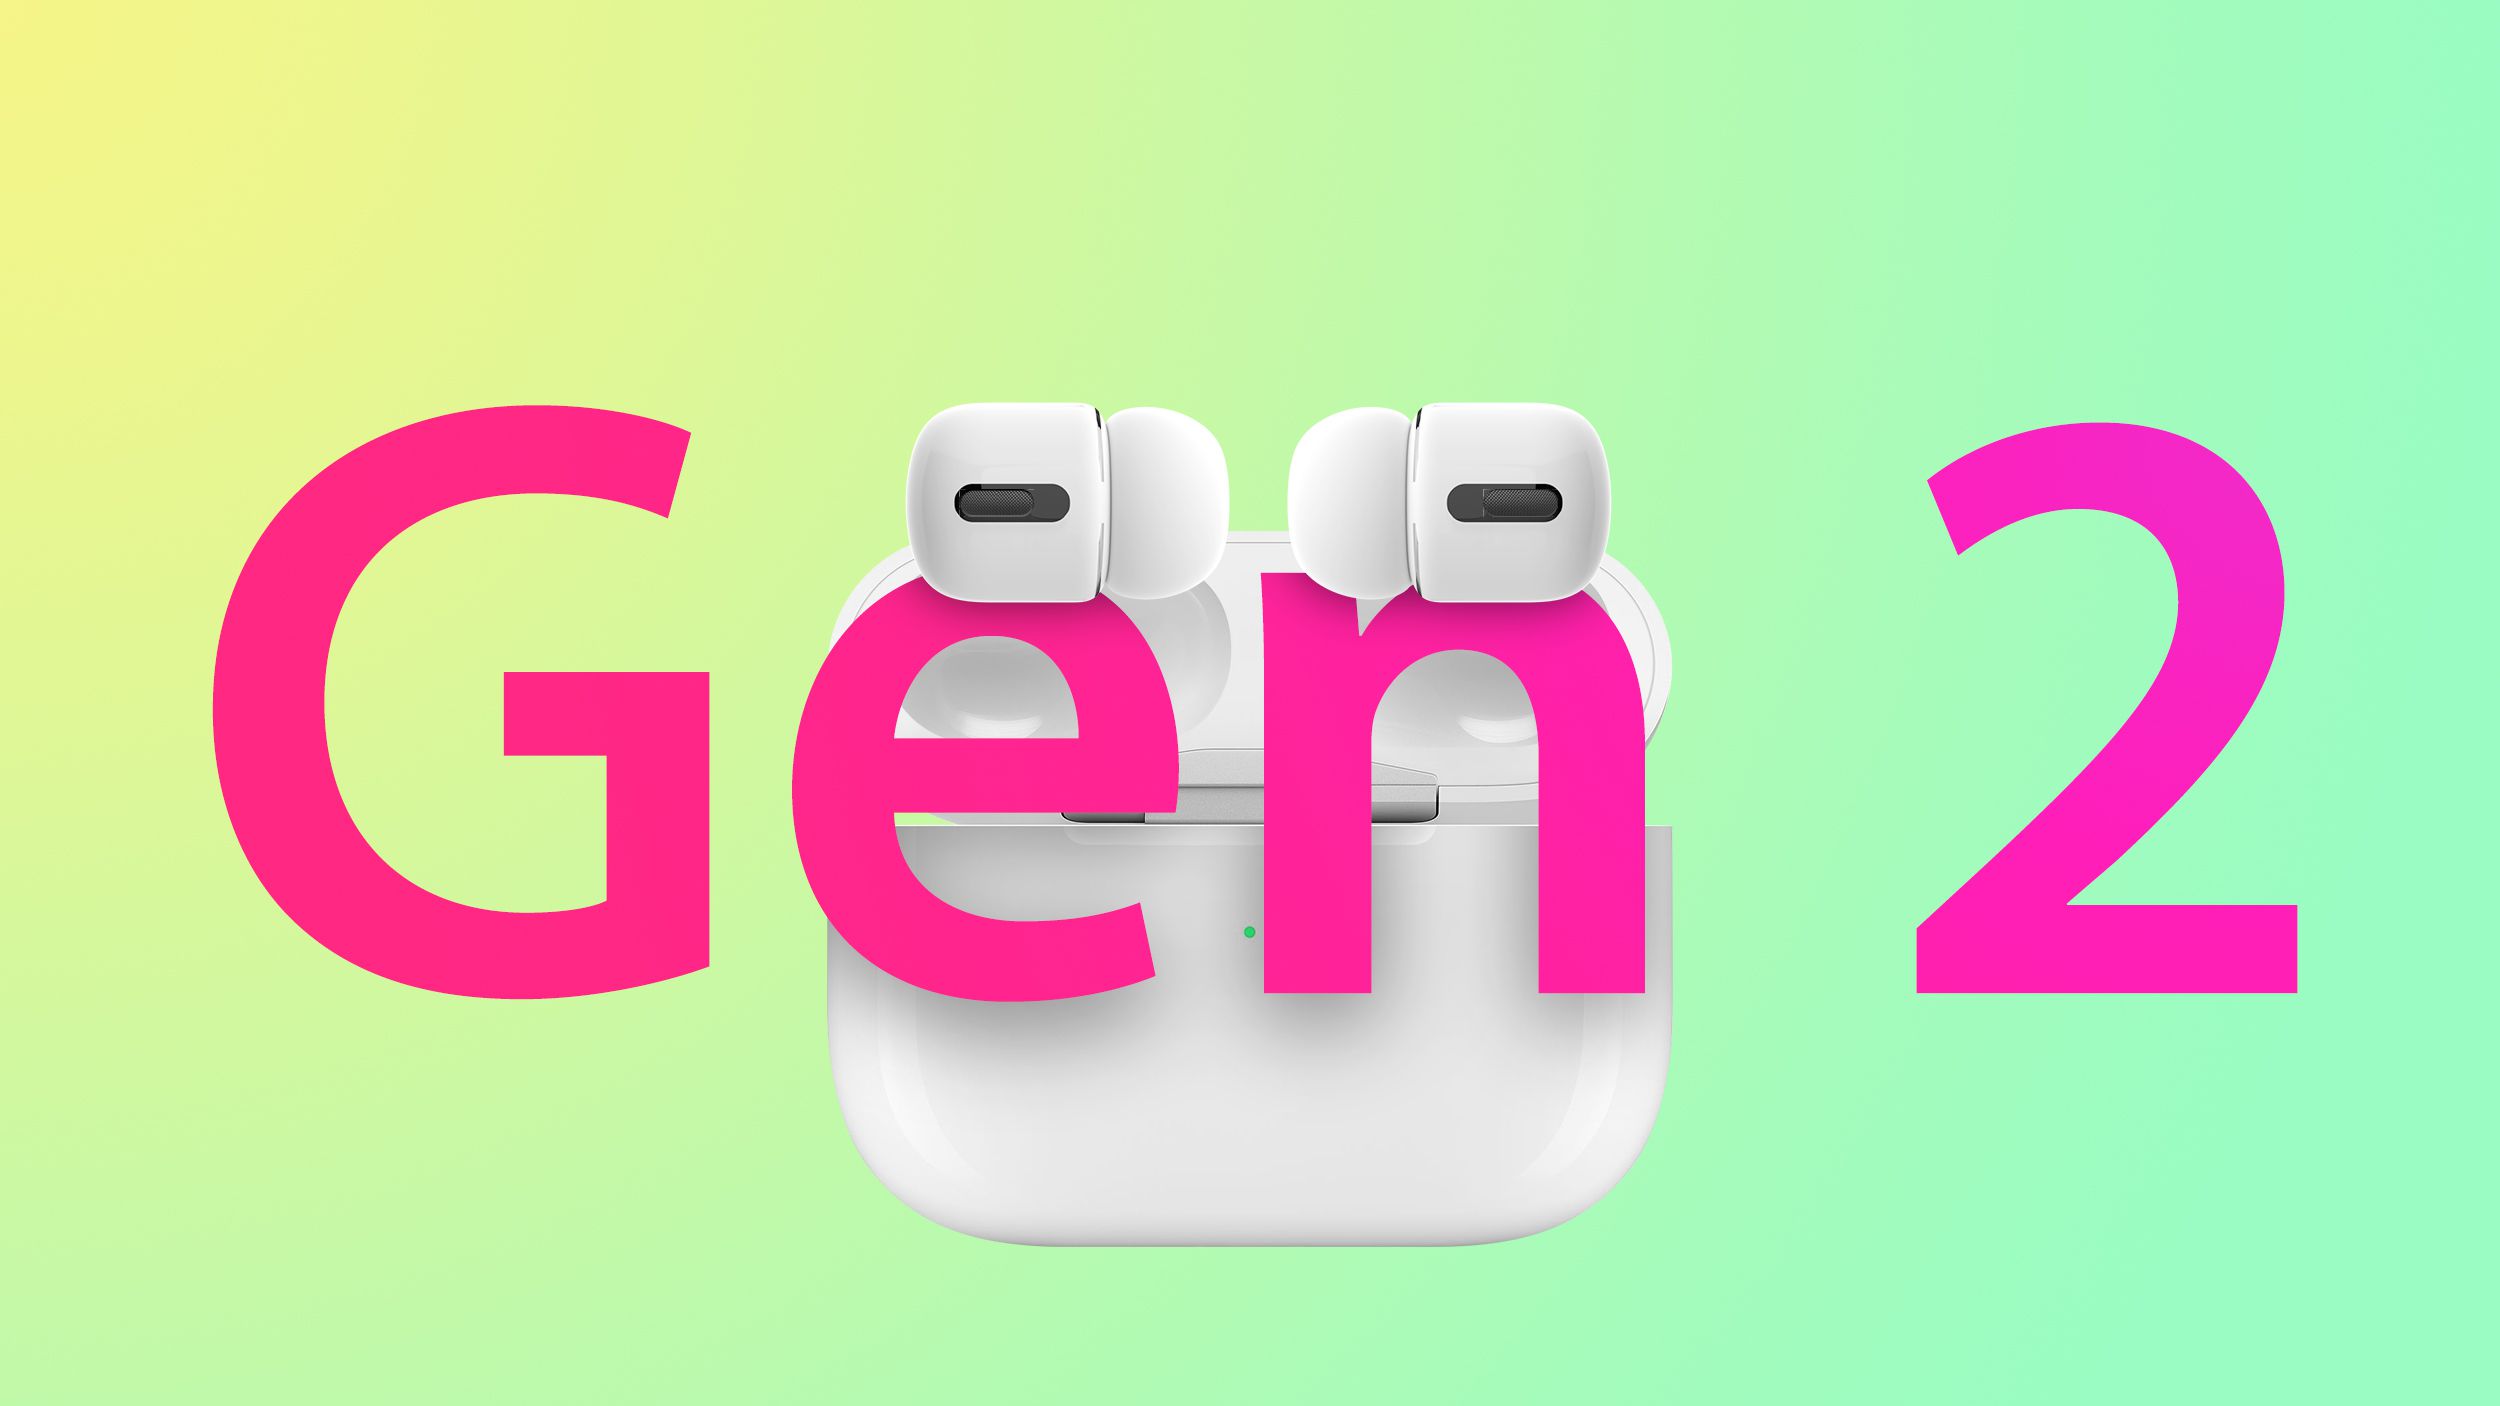 Second generation AirPods Pro to be widely publicized in the first half of 2021